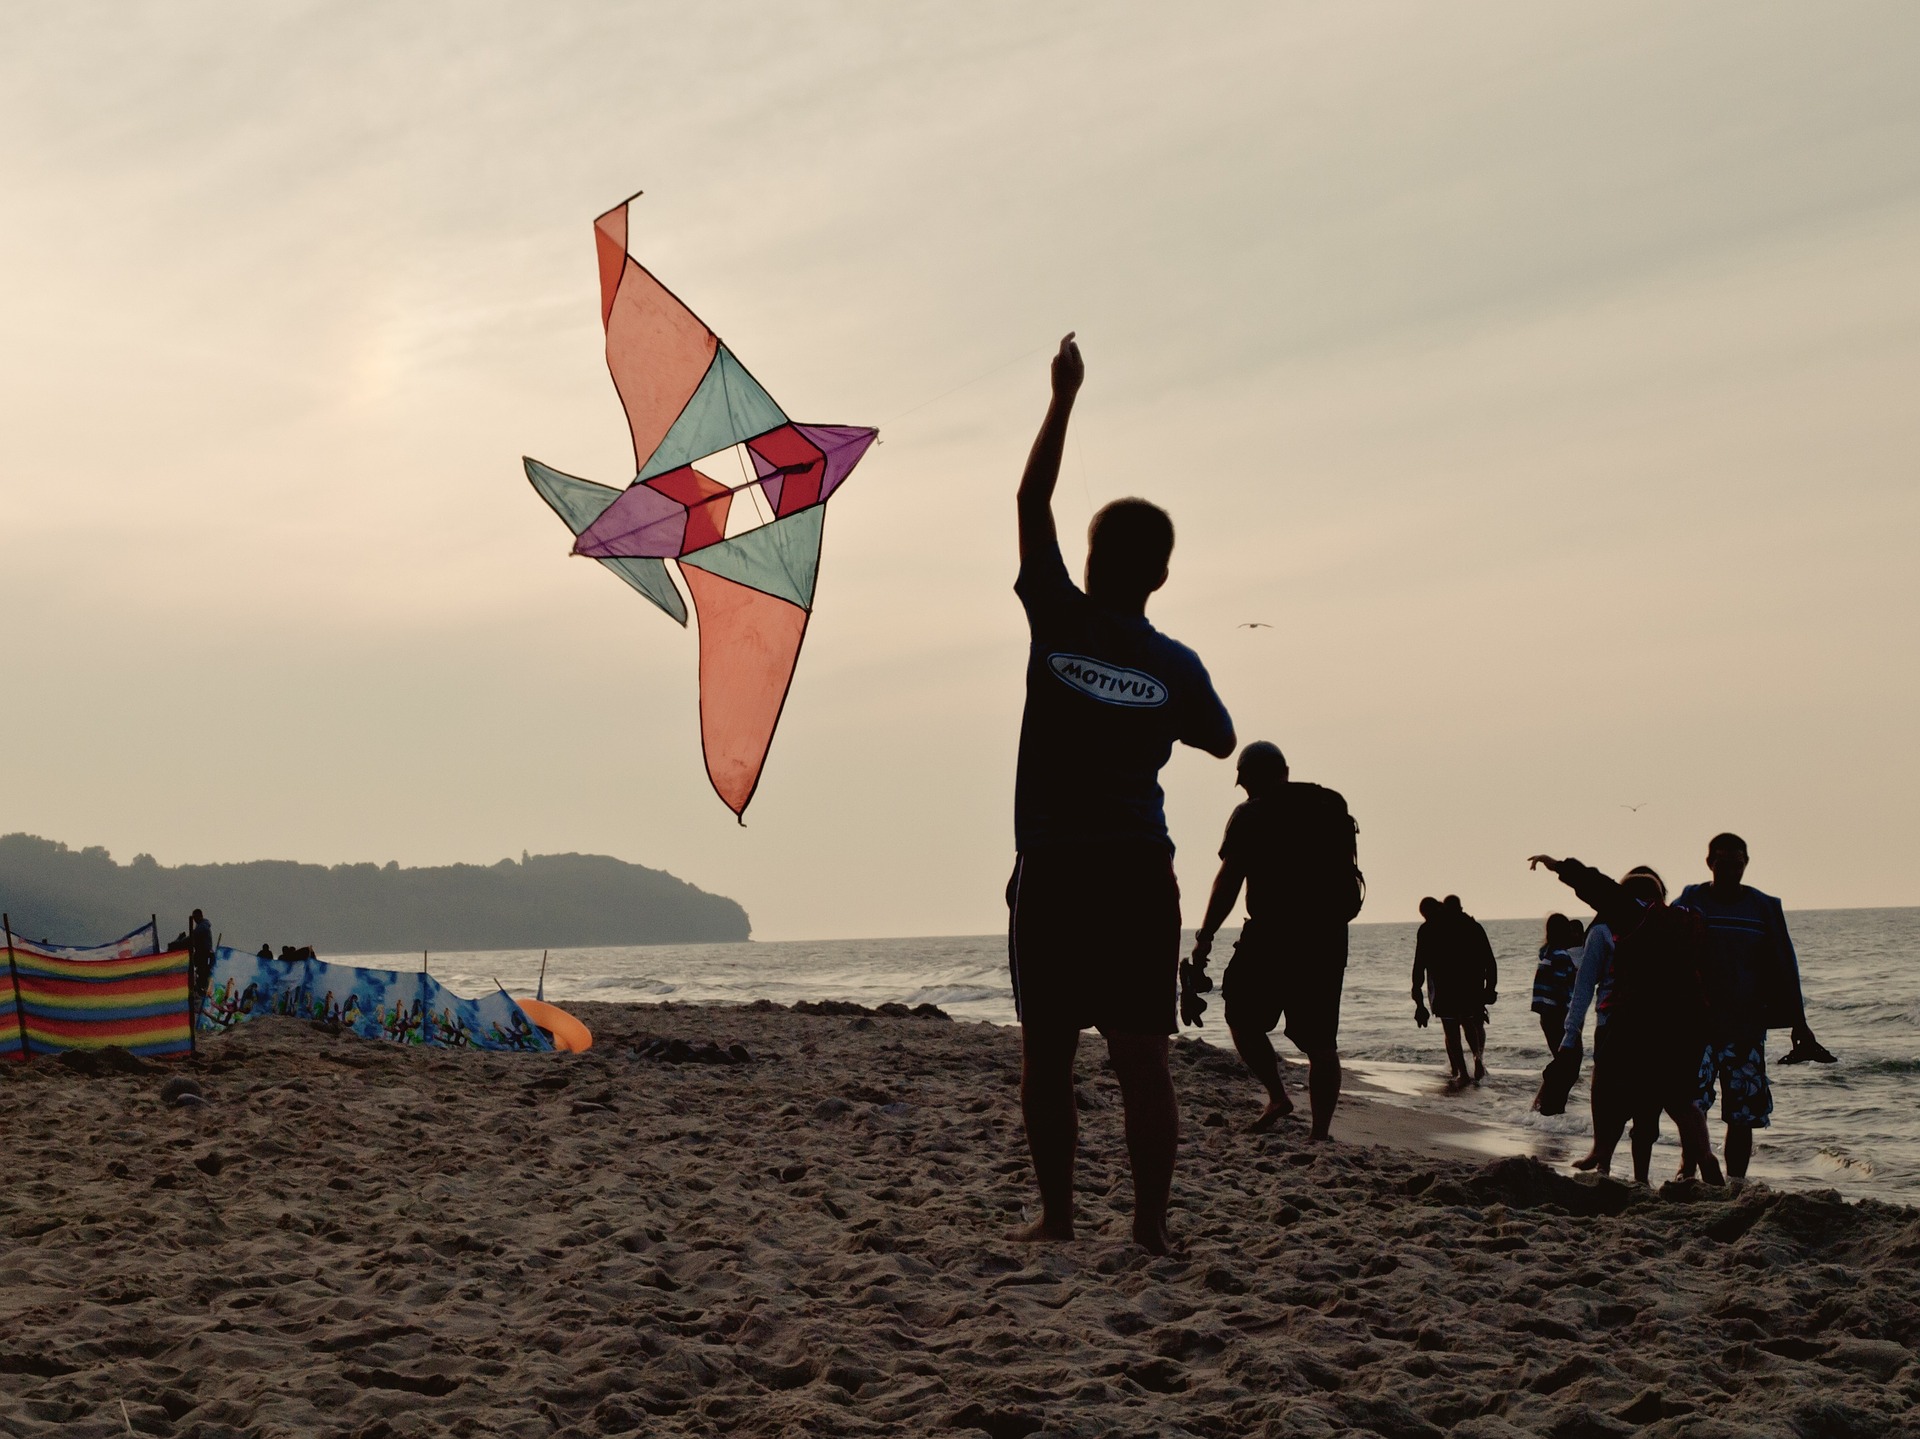 Rad kites for fearless flyers